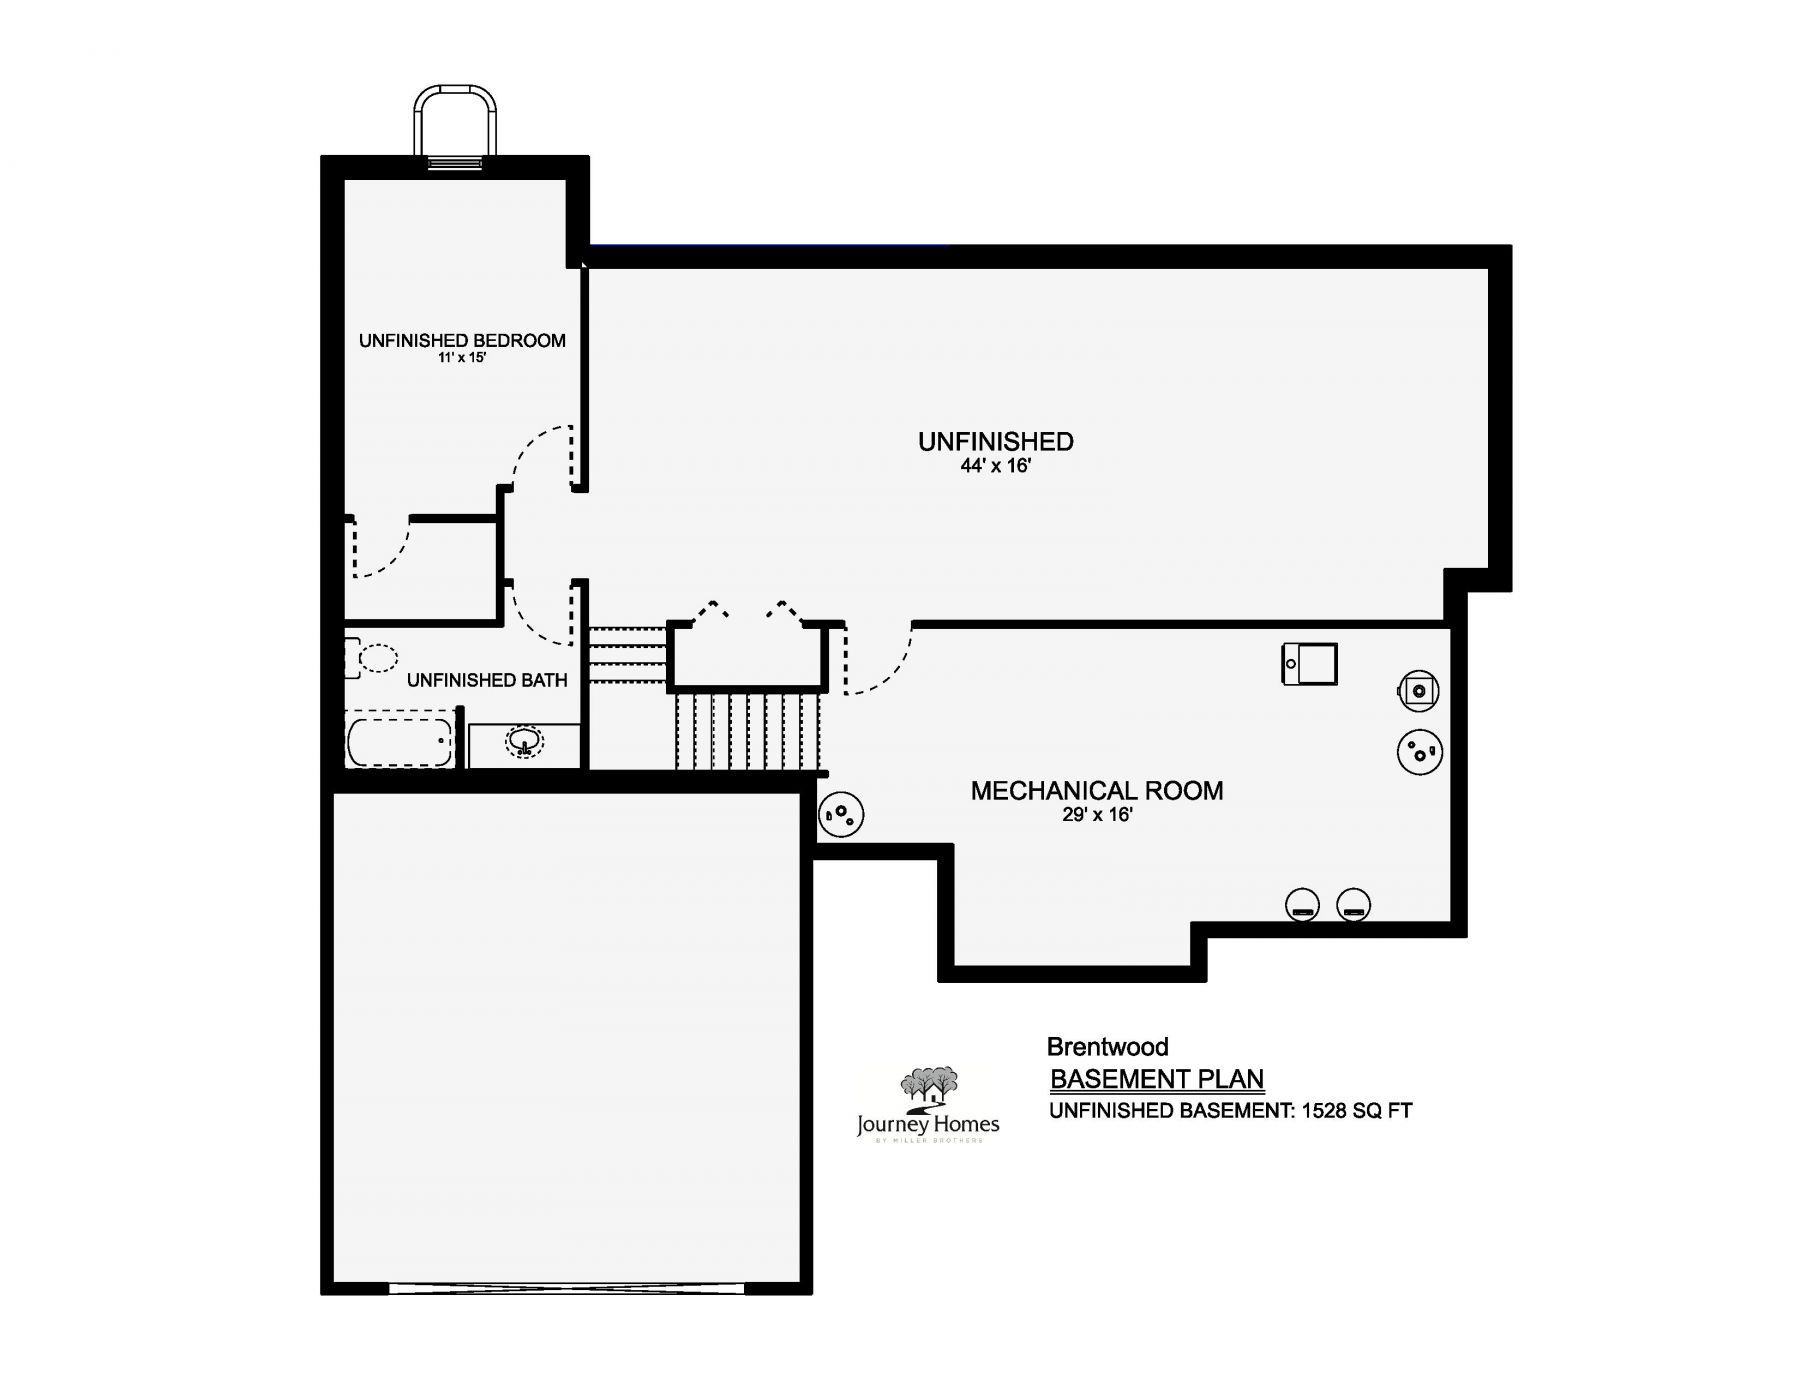 Journey Homes - Brentwood - 1,528 SQ FT